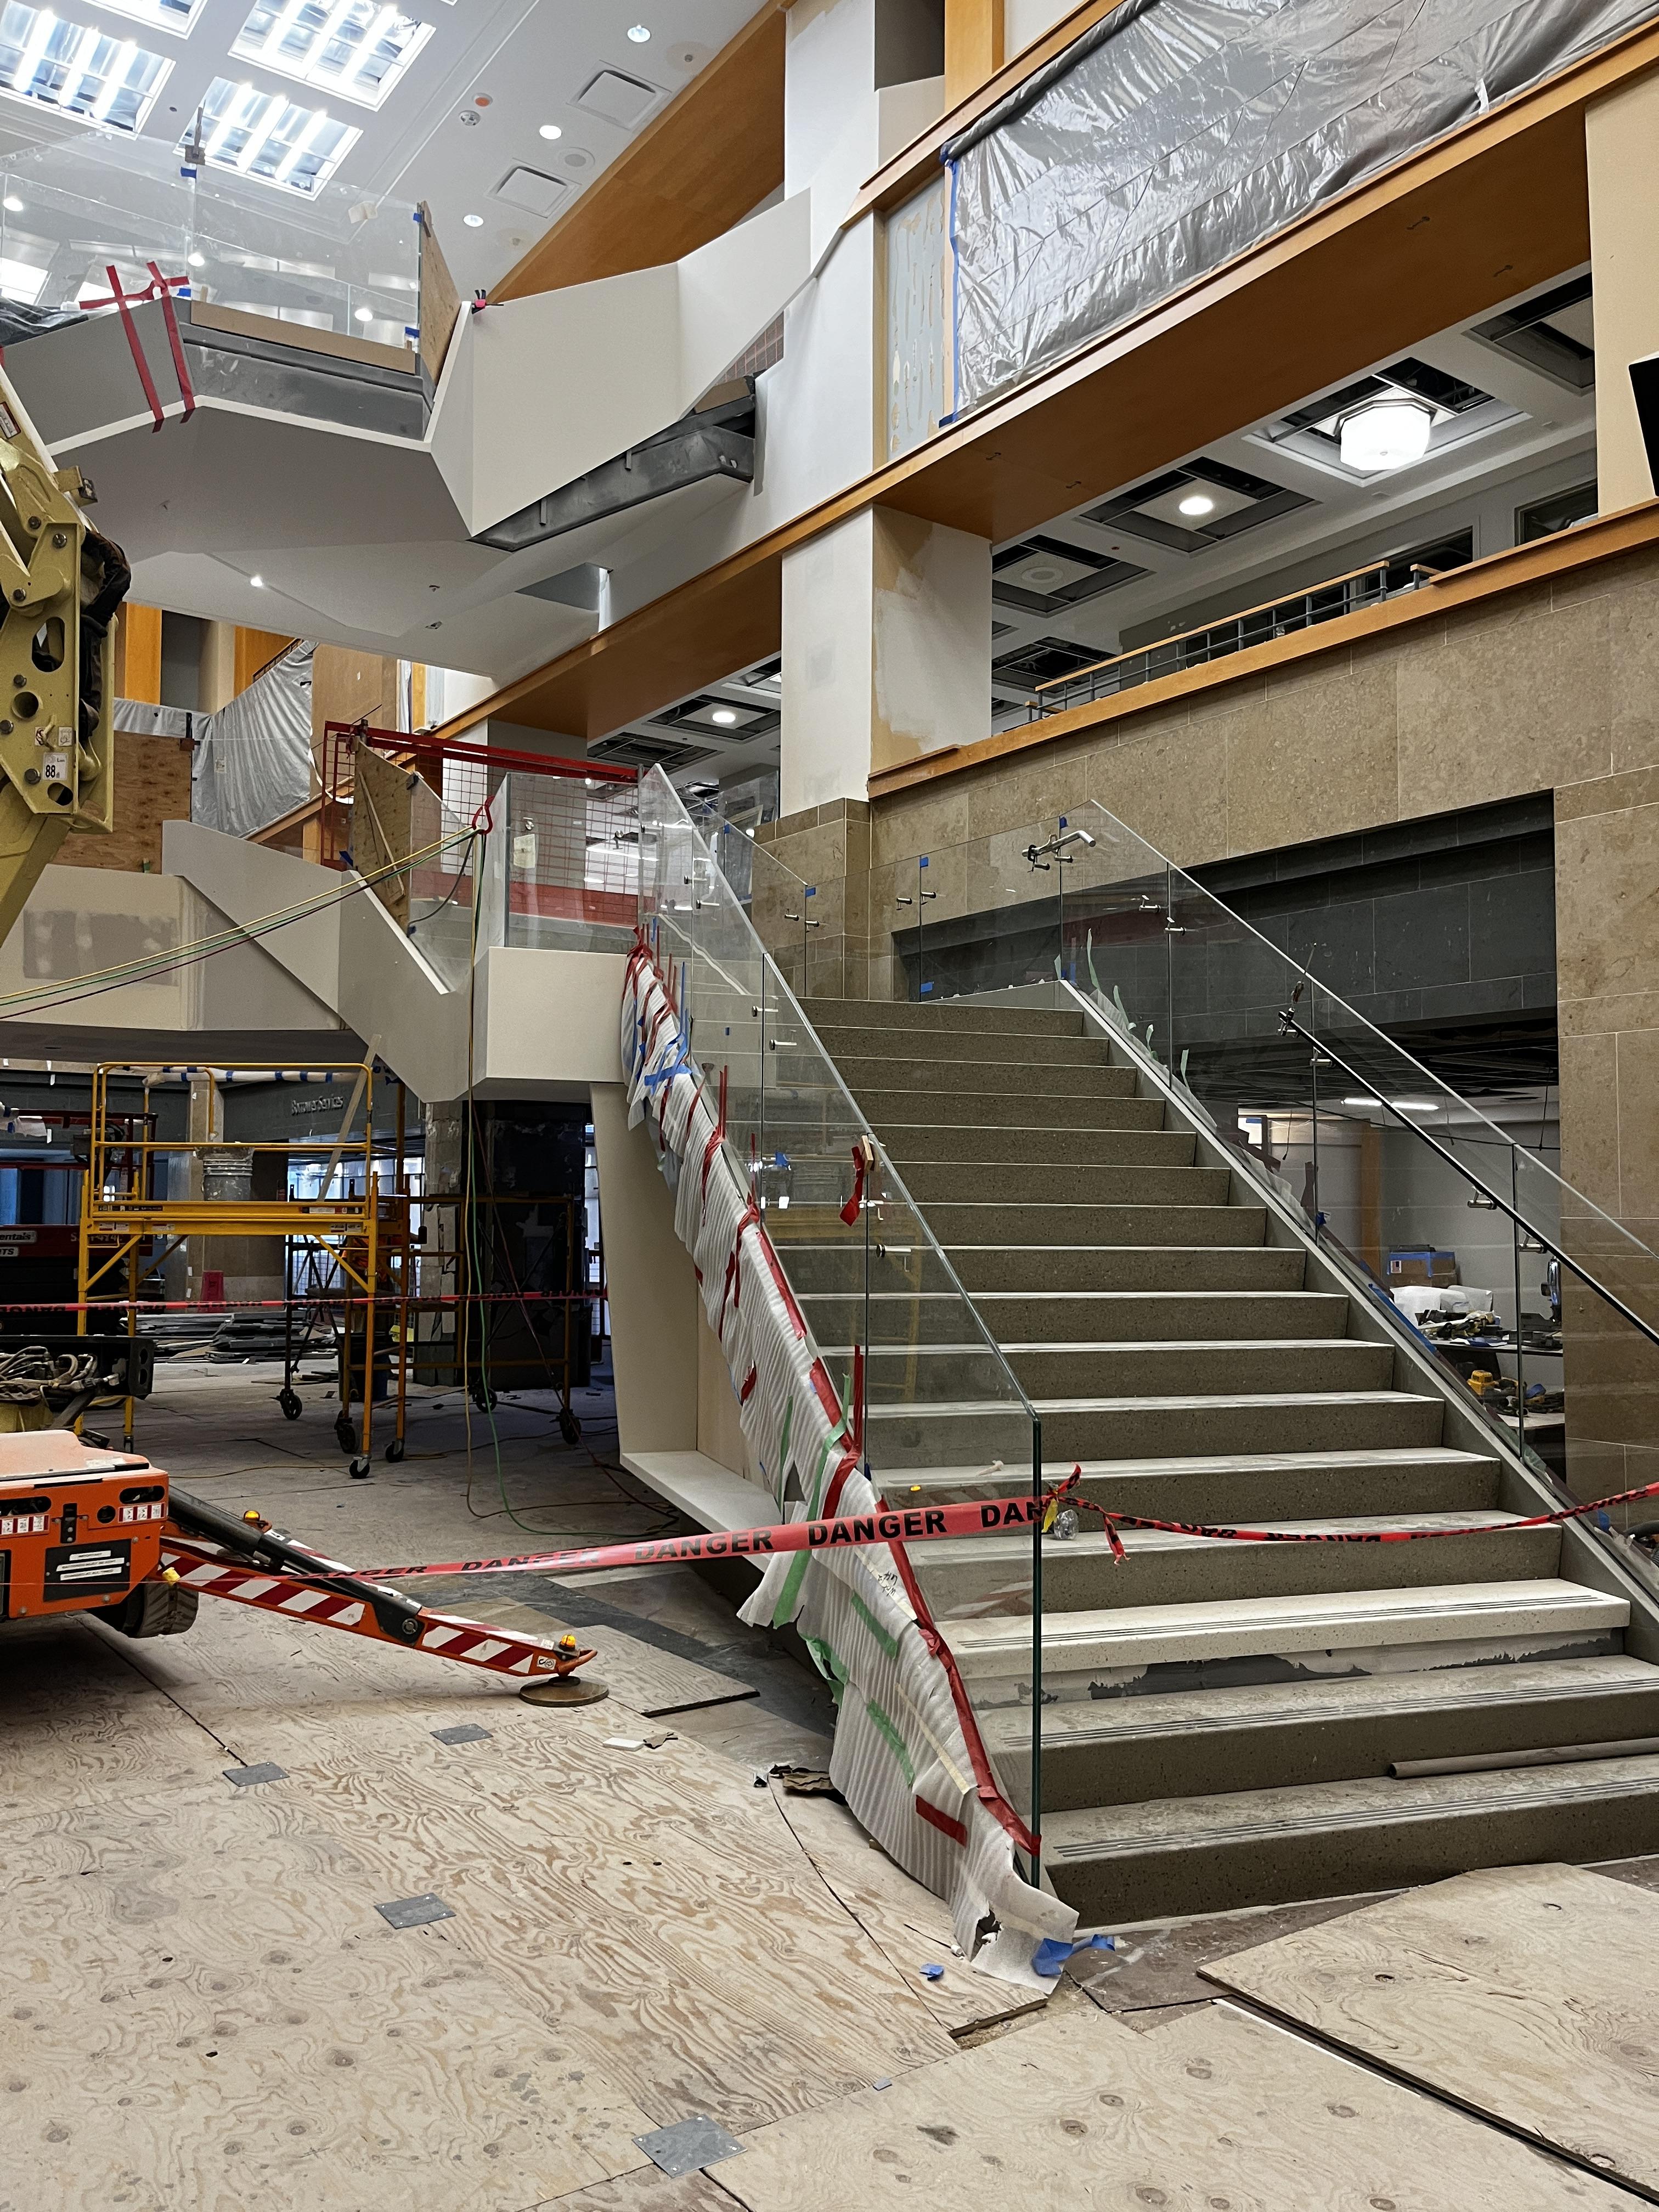 A picture of the newly added grand staircase at the Central Library. The staircase is nearly complete, but the photo shows construction tape and tools surrounding it.